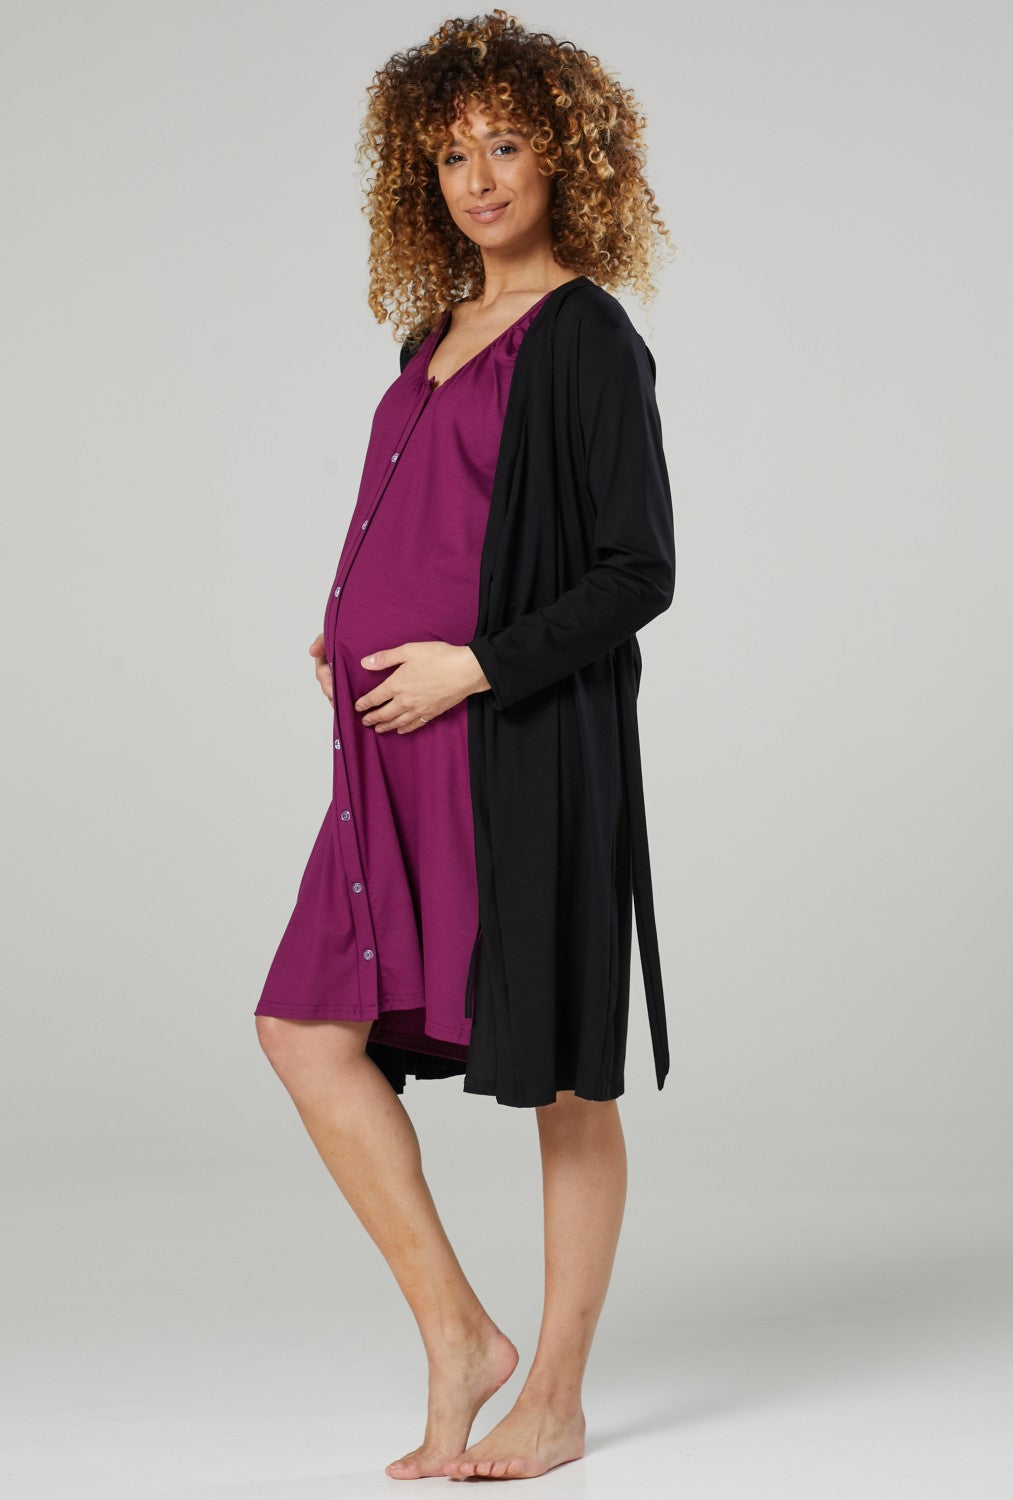 Maternity Hospital Bag Set Delivery Nightie & Robe In Bei, Happy Mama